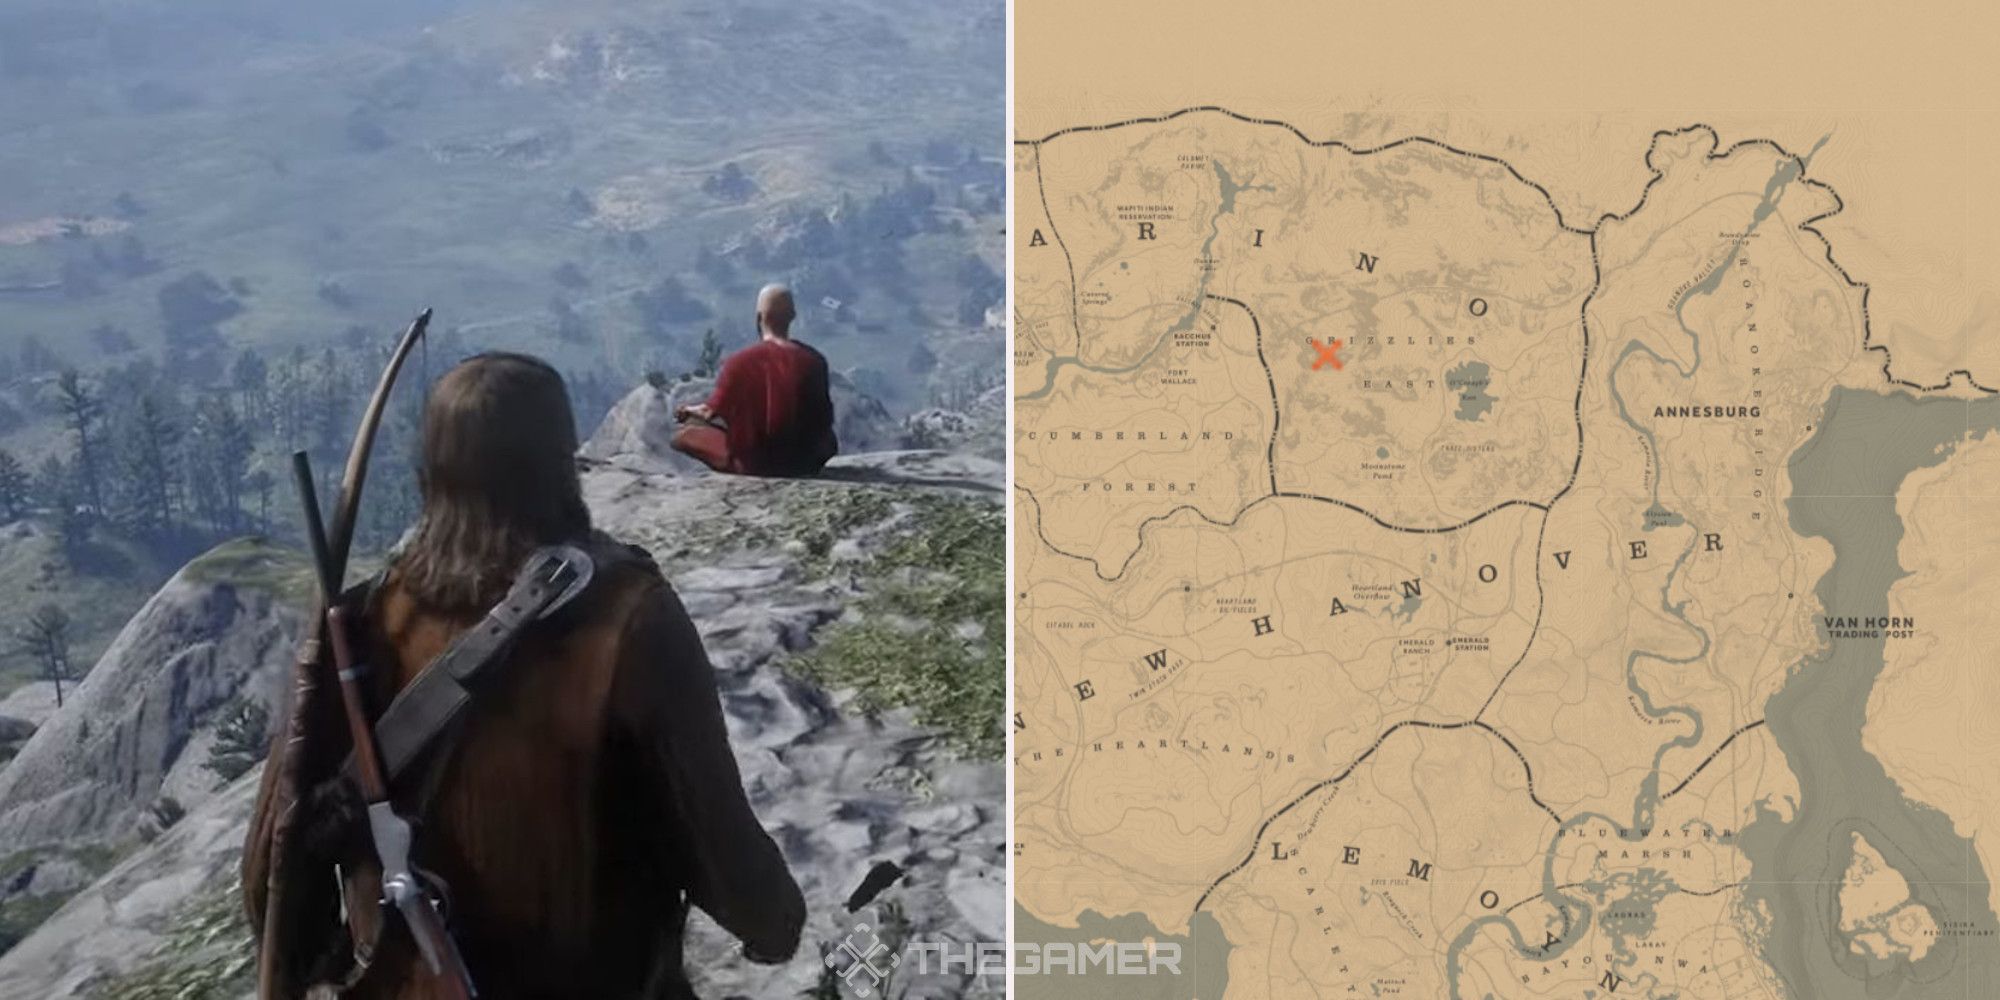 A monk meditating on a clifftop, next to an image of the location he can be found marked on the map.